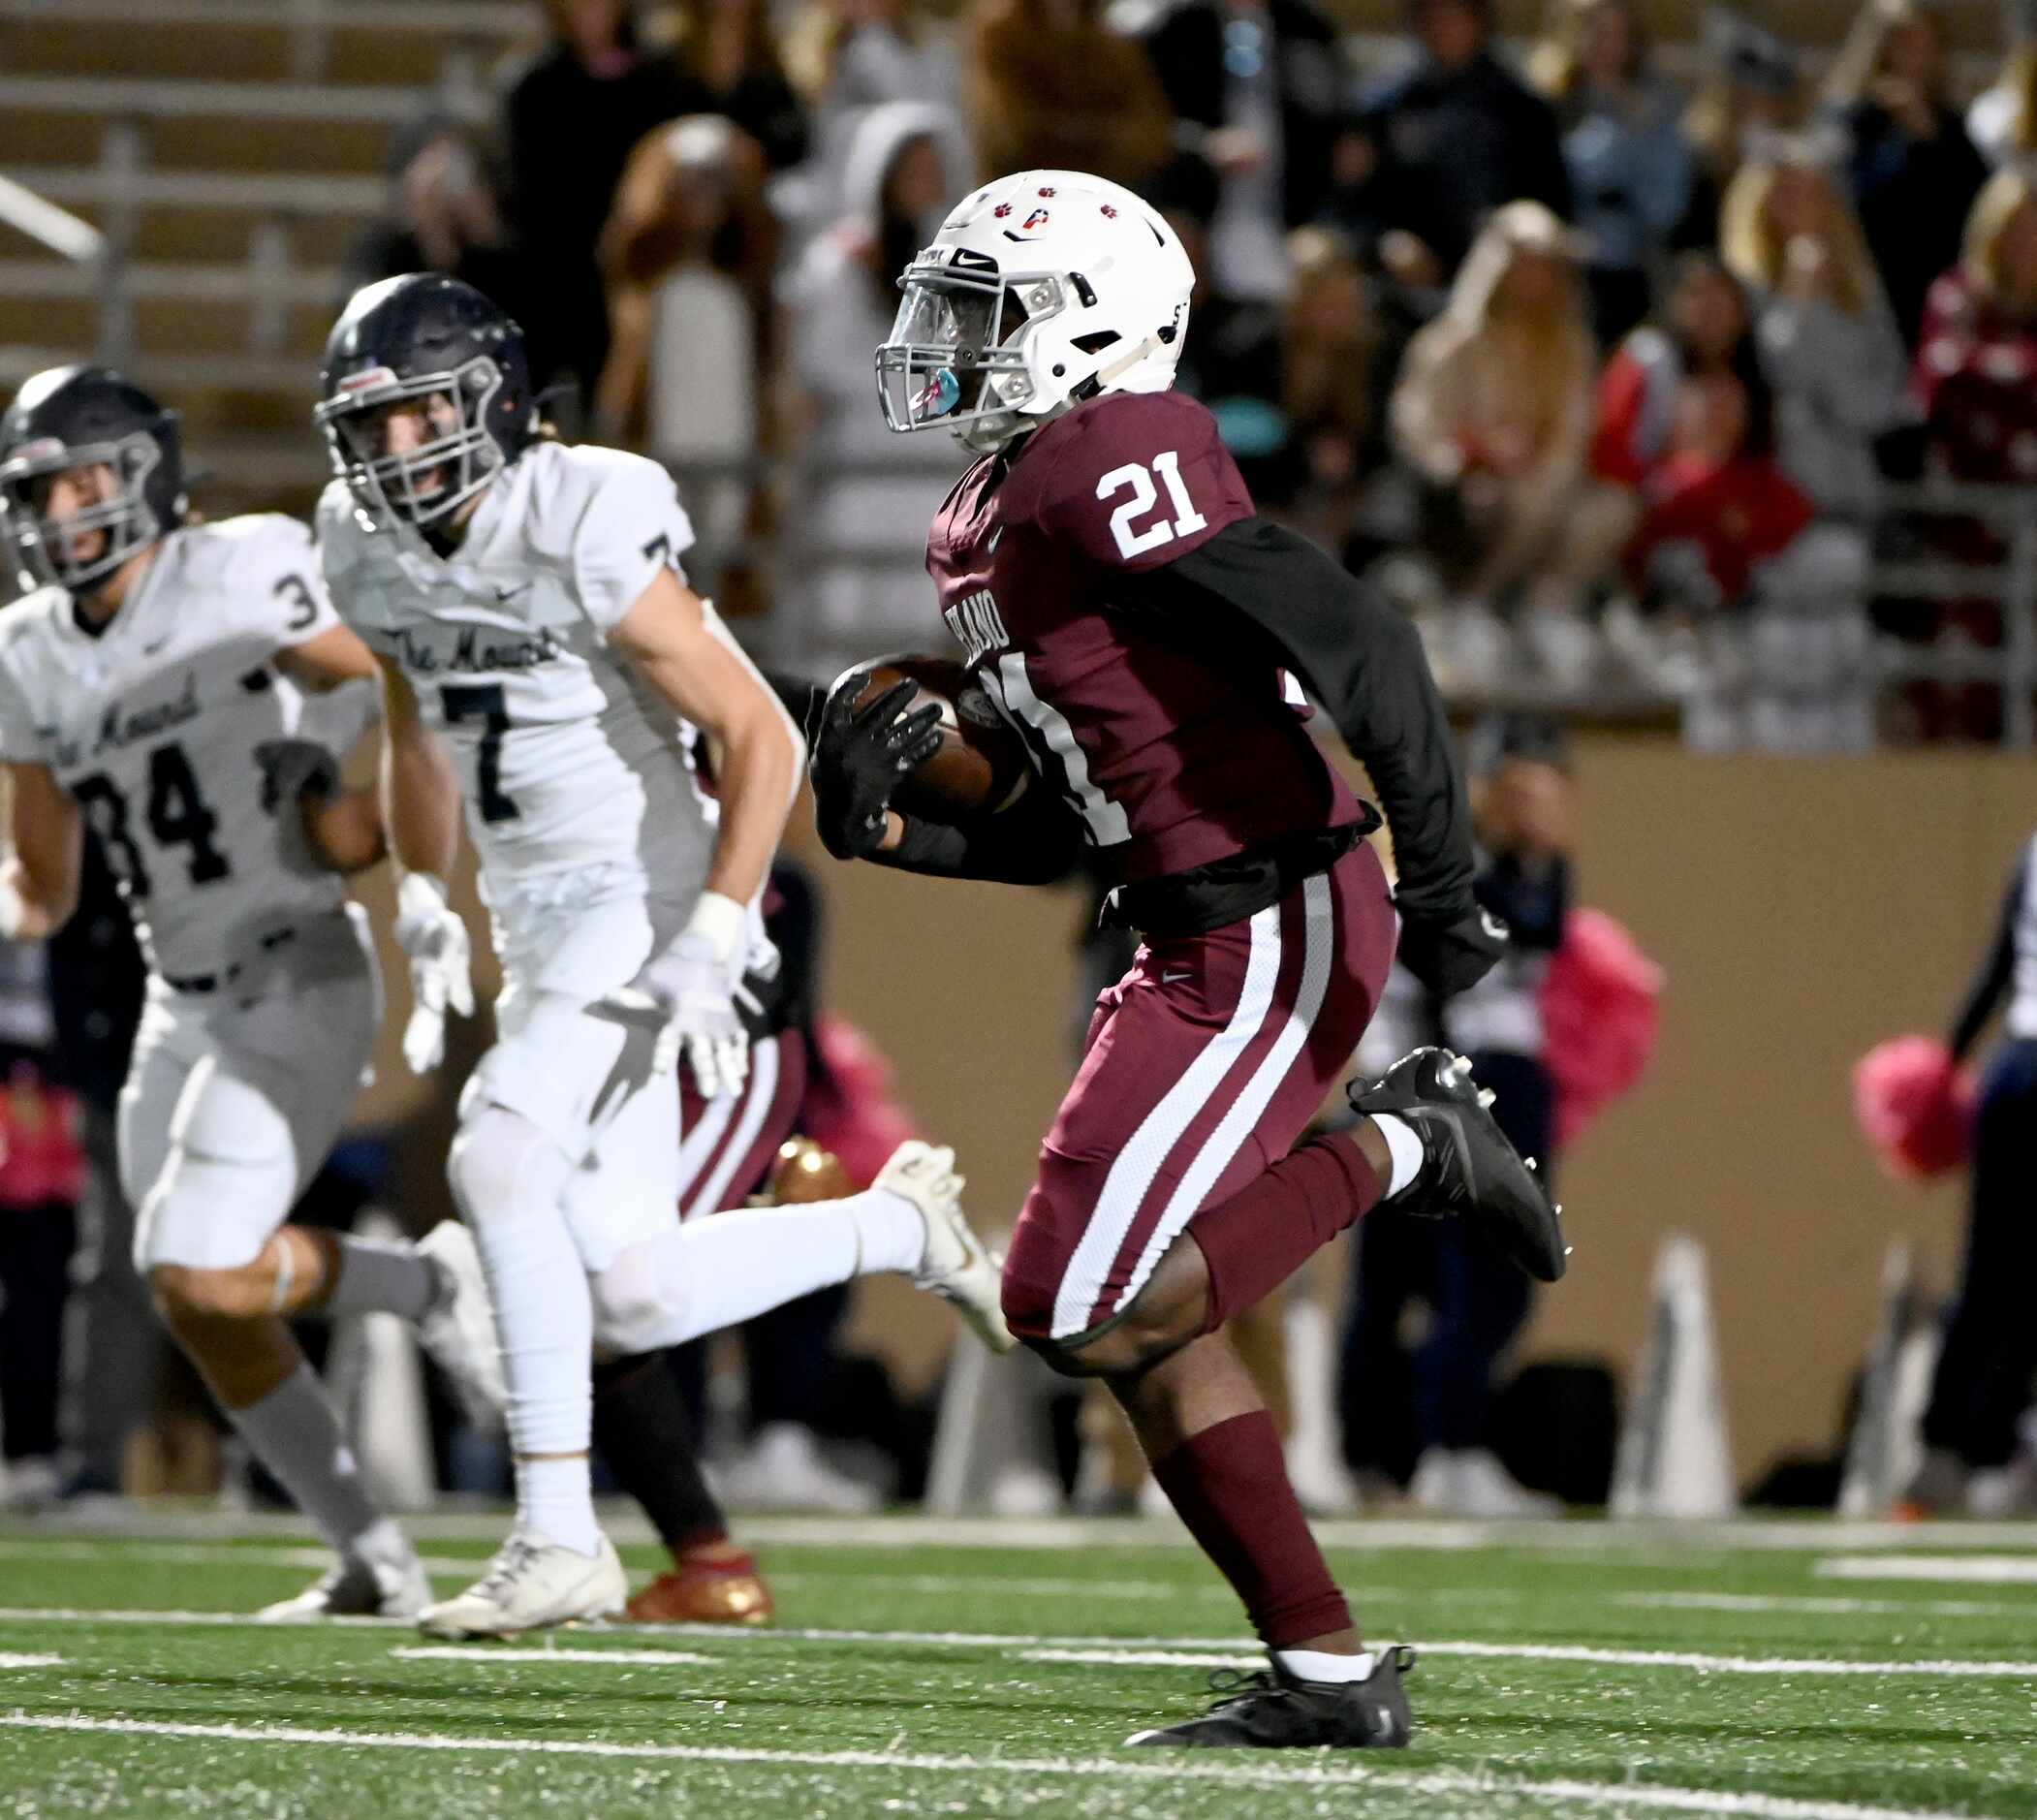 Plano’s Jacob Emmers (21) runs upfield on his way to a long touchdown reception in the first...